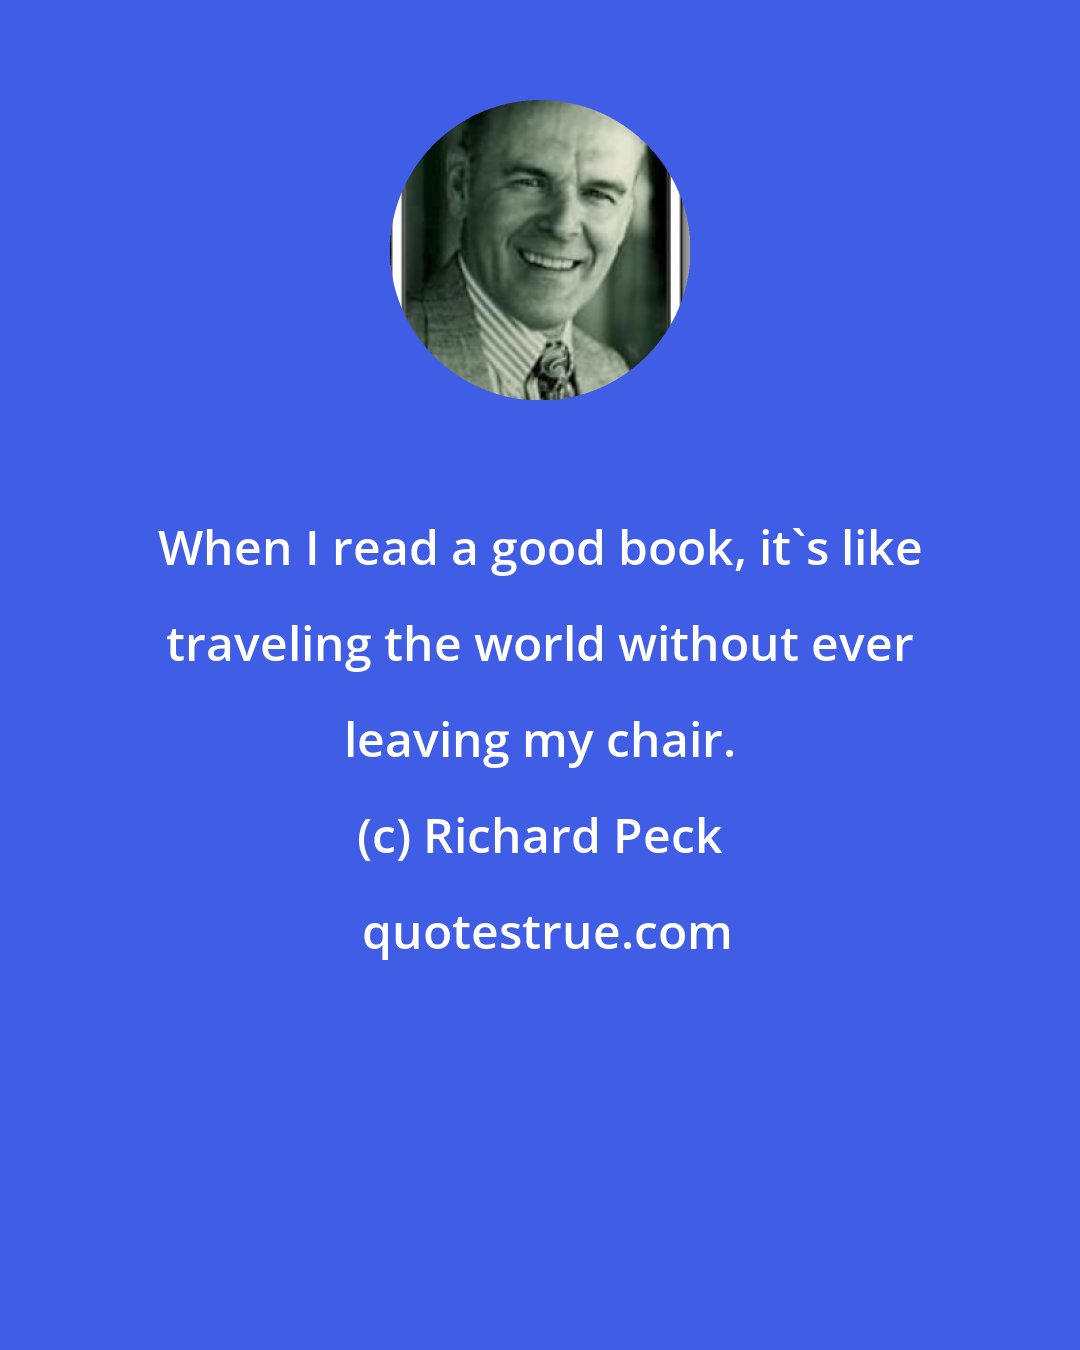 Richard Peck: When I read a good book, it's like traveling the world without ever leaving my chair.